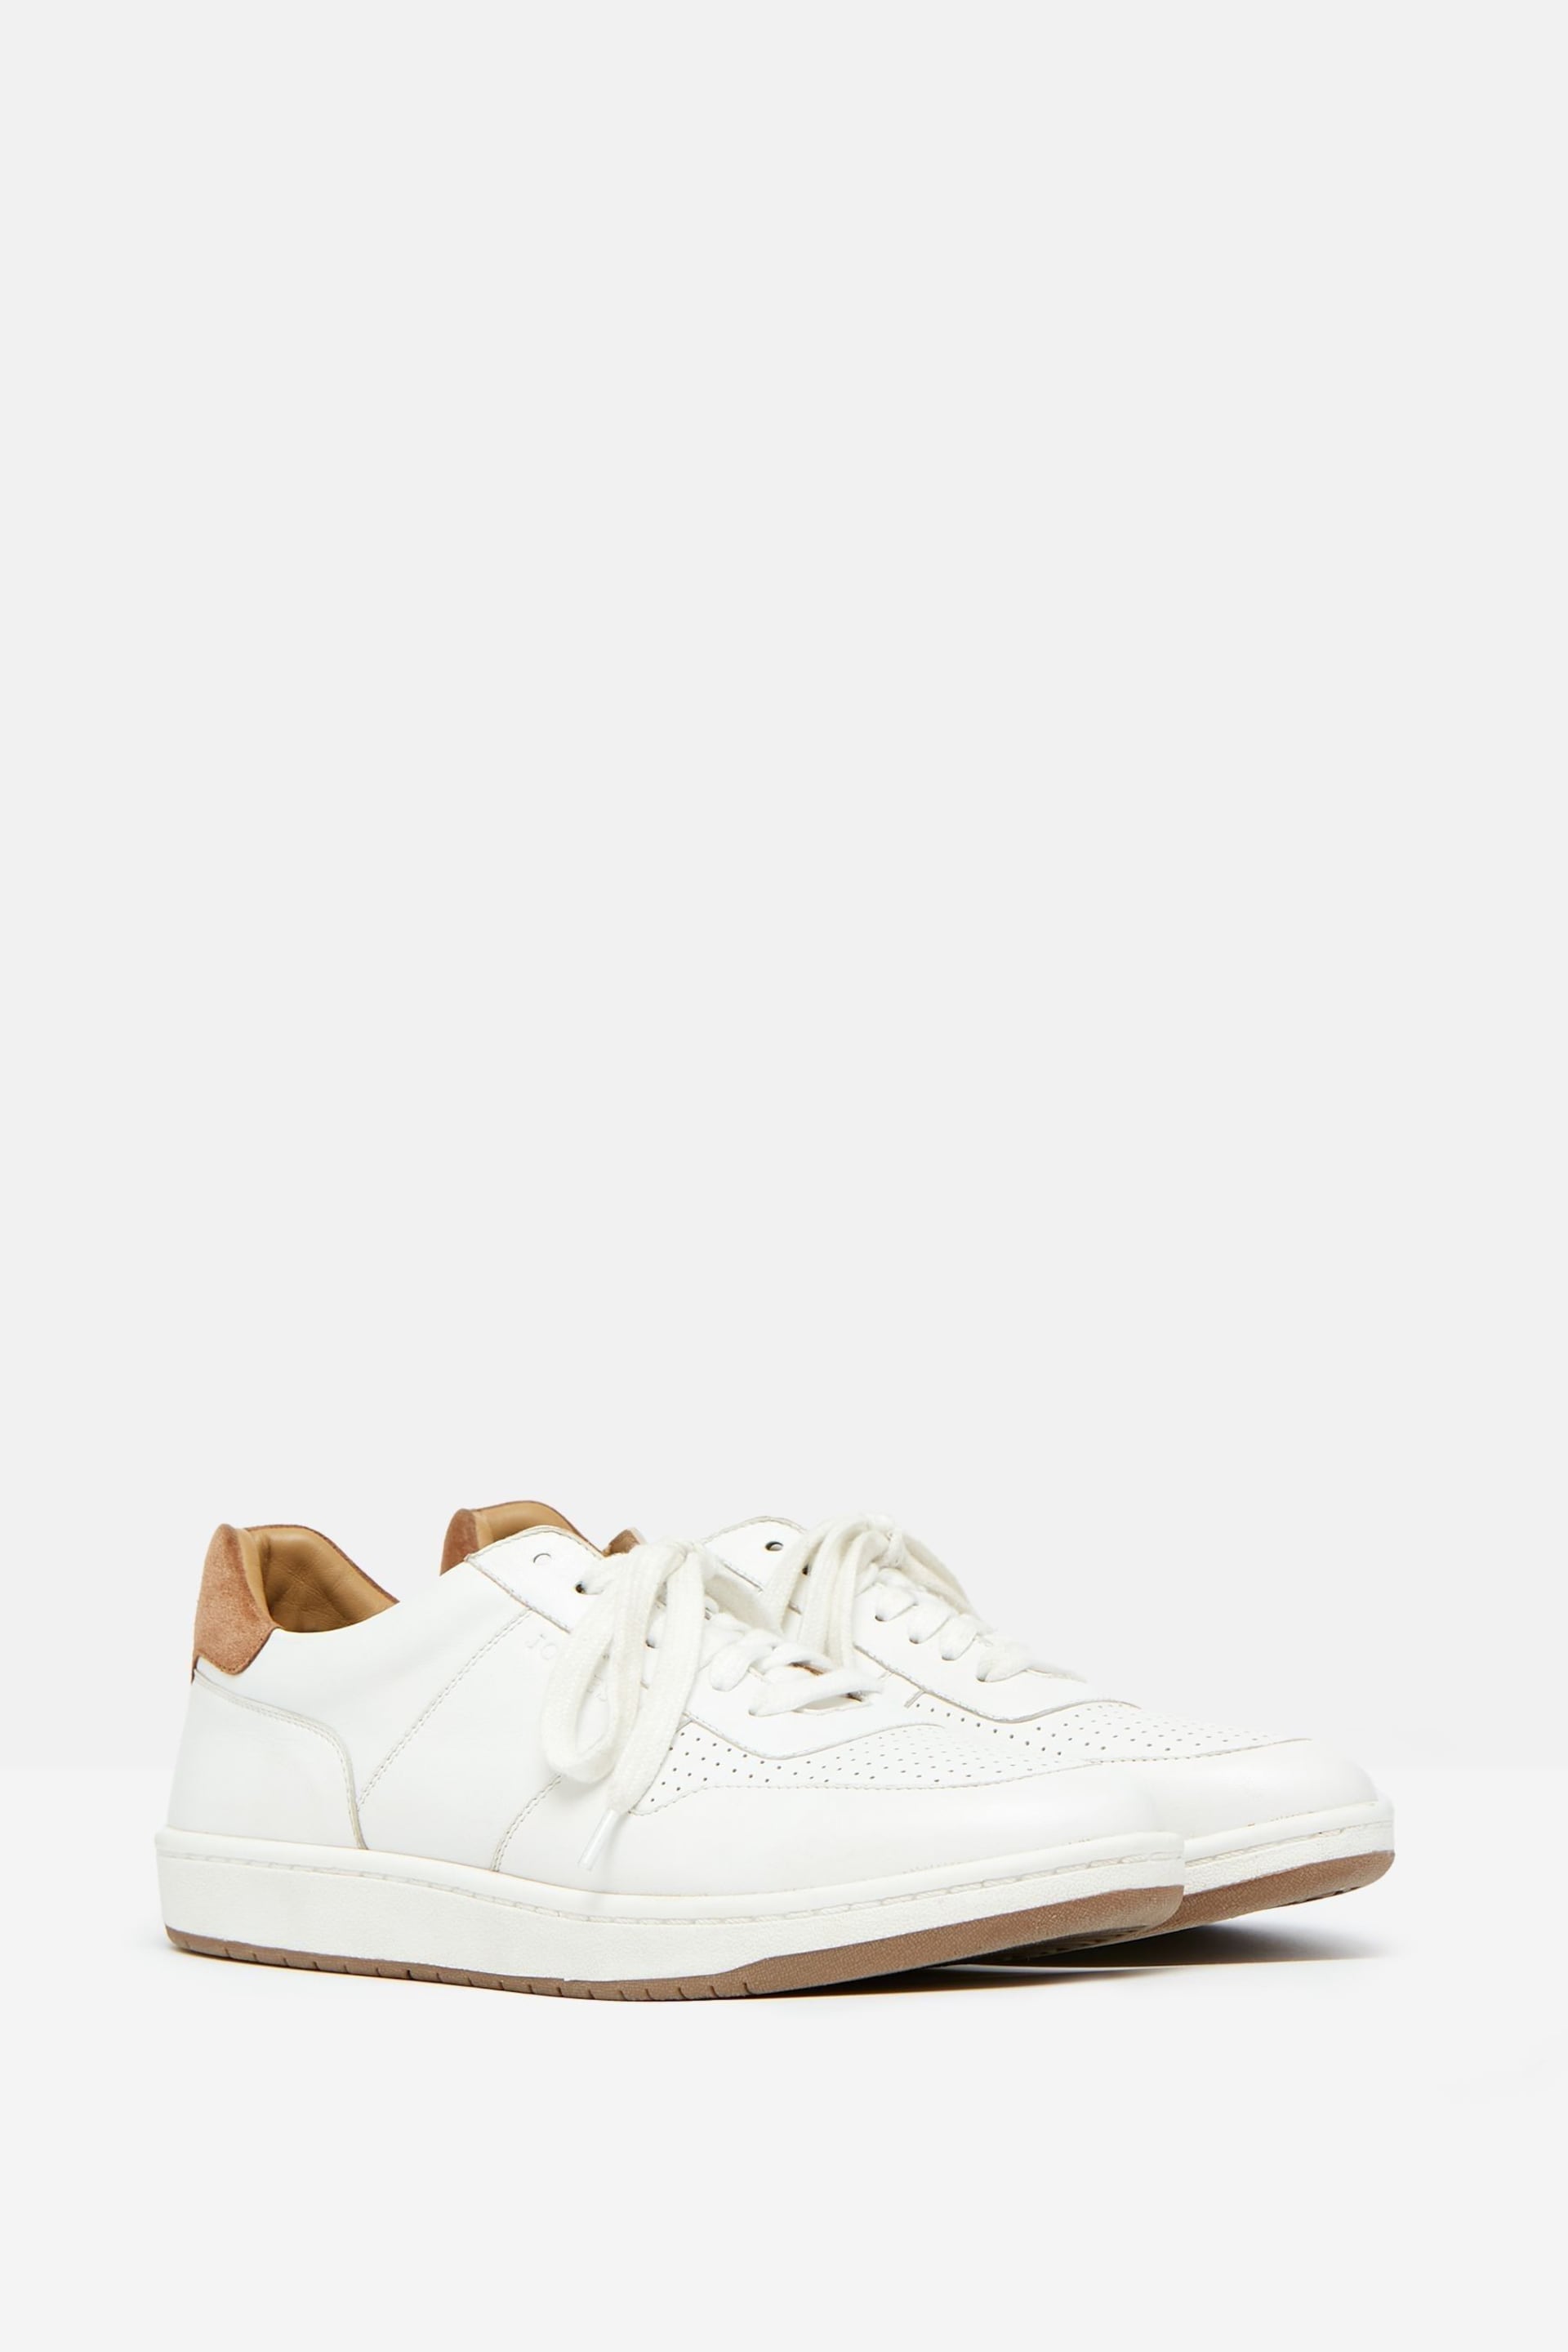 Joules Colston White Leather Trainers - Image 2 of 5